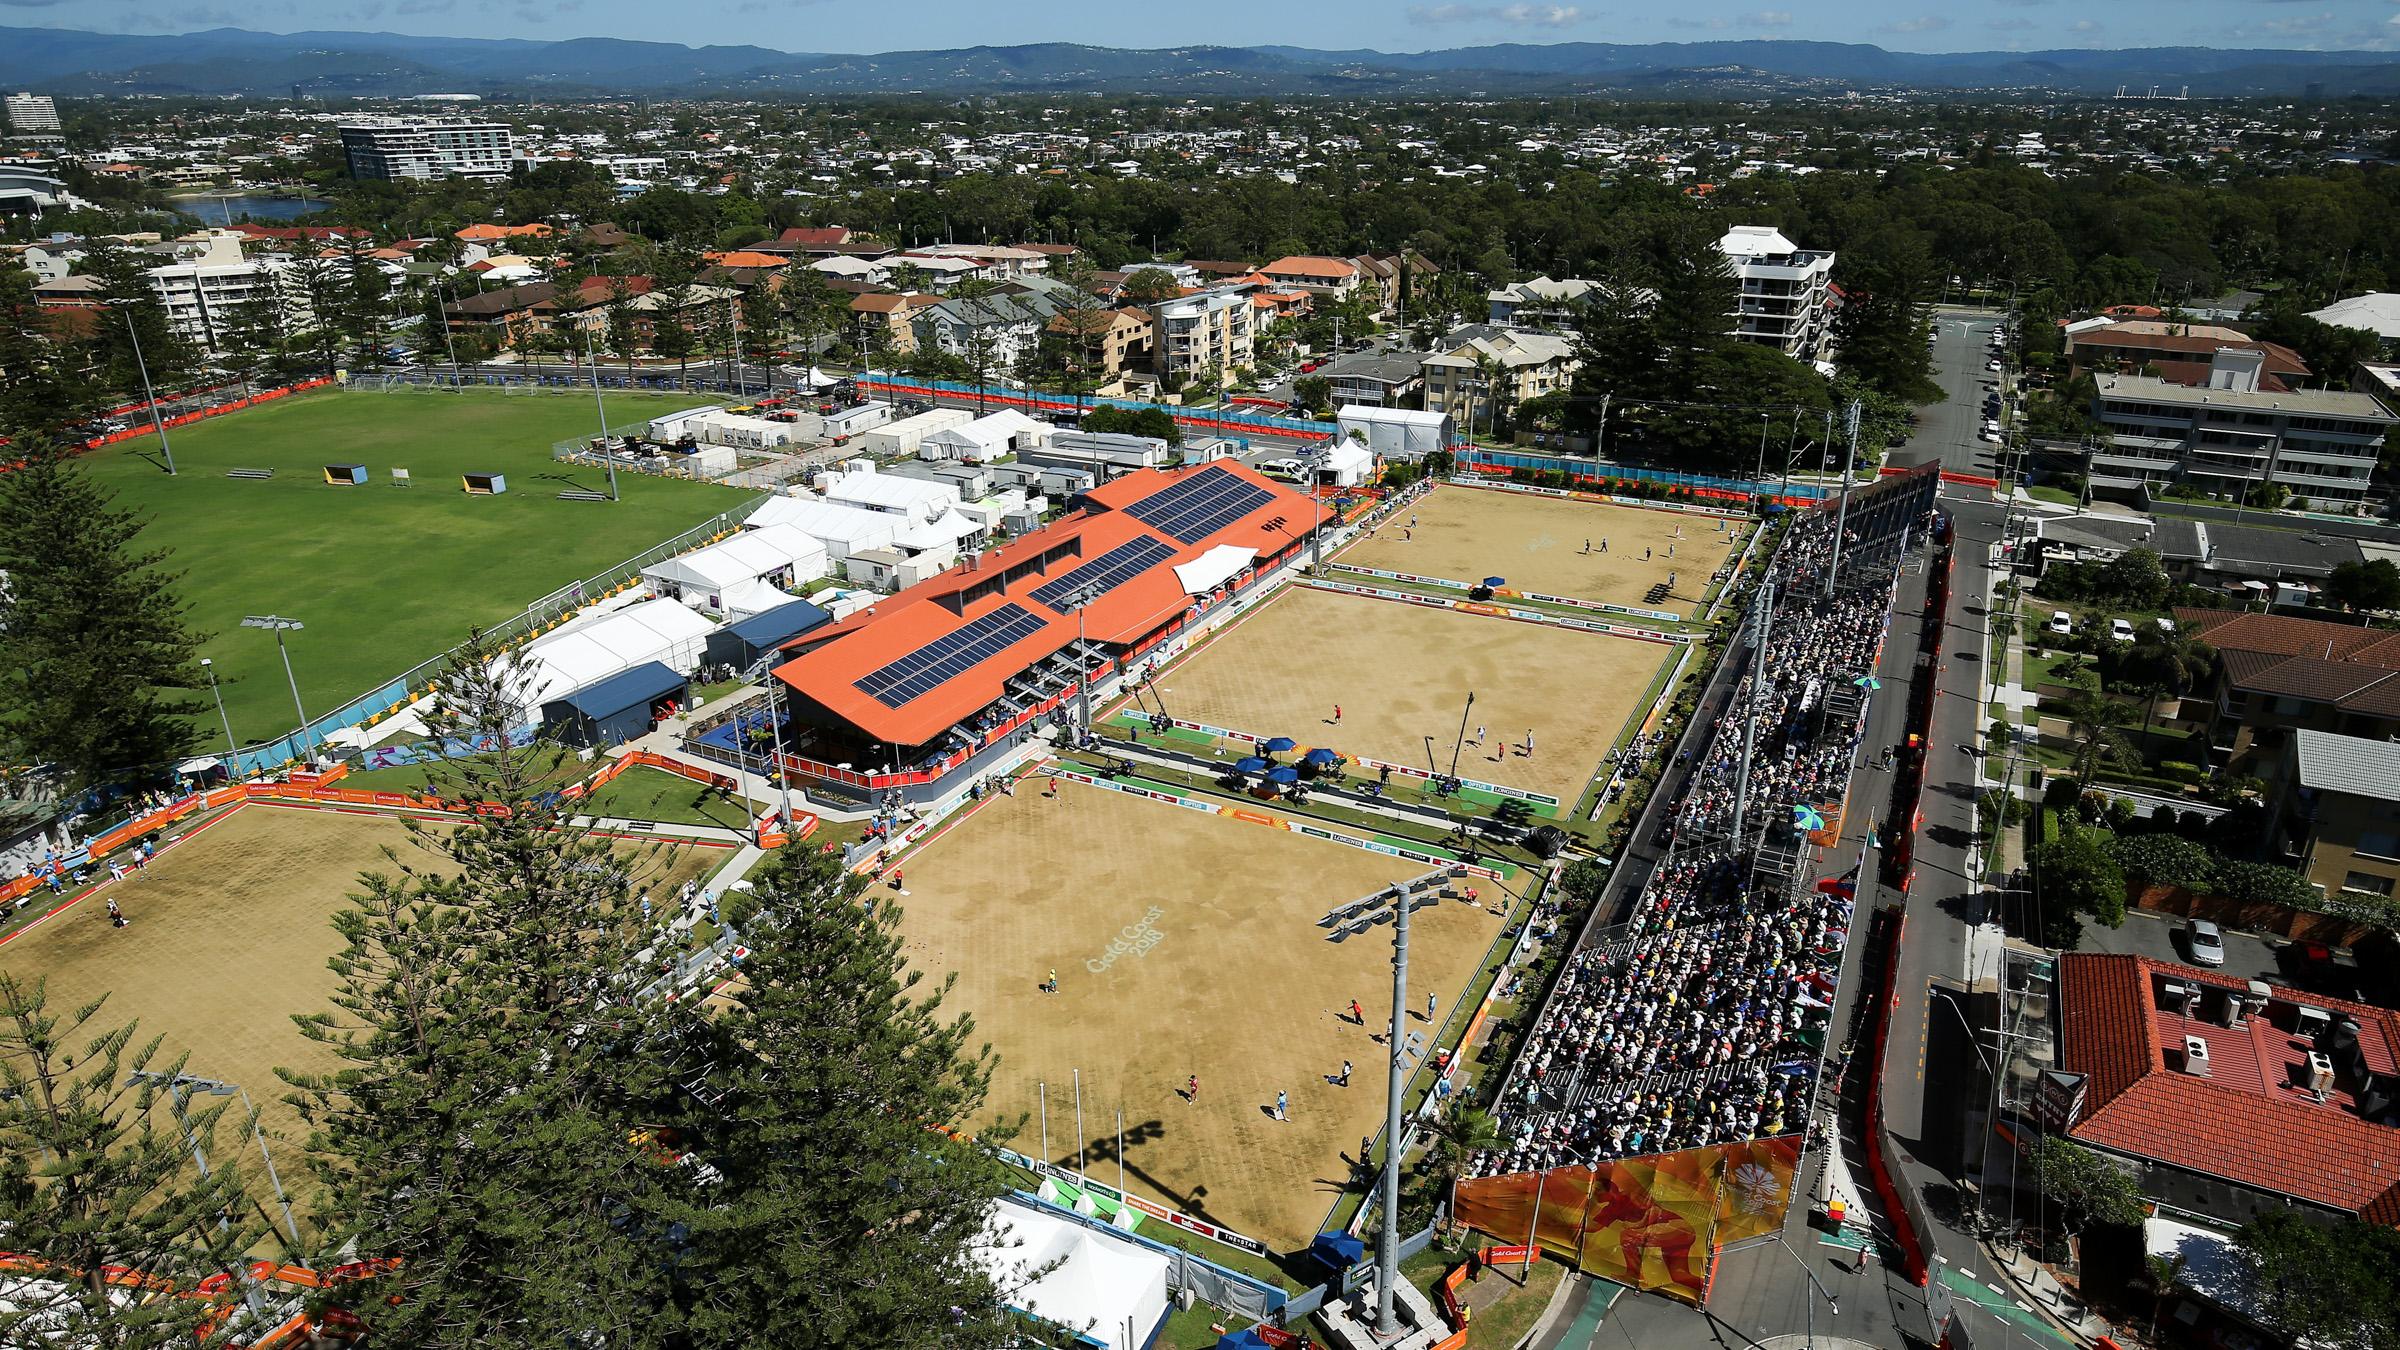 Aerial view of Broadbeach Bowls Club, with a stadium full of people watching a Commonwealth Games event